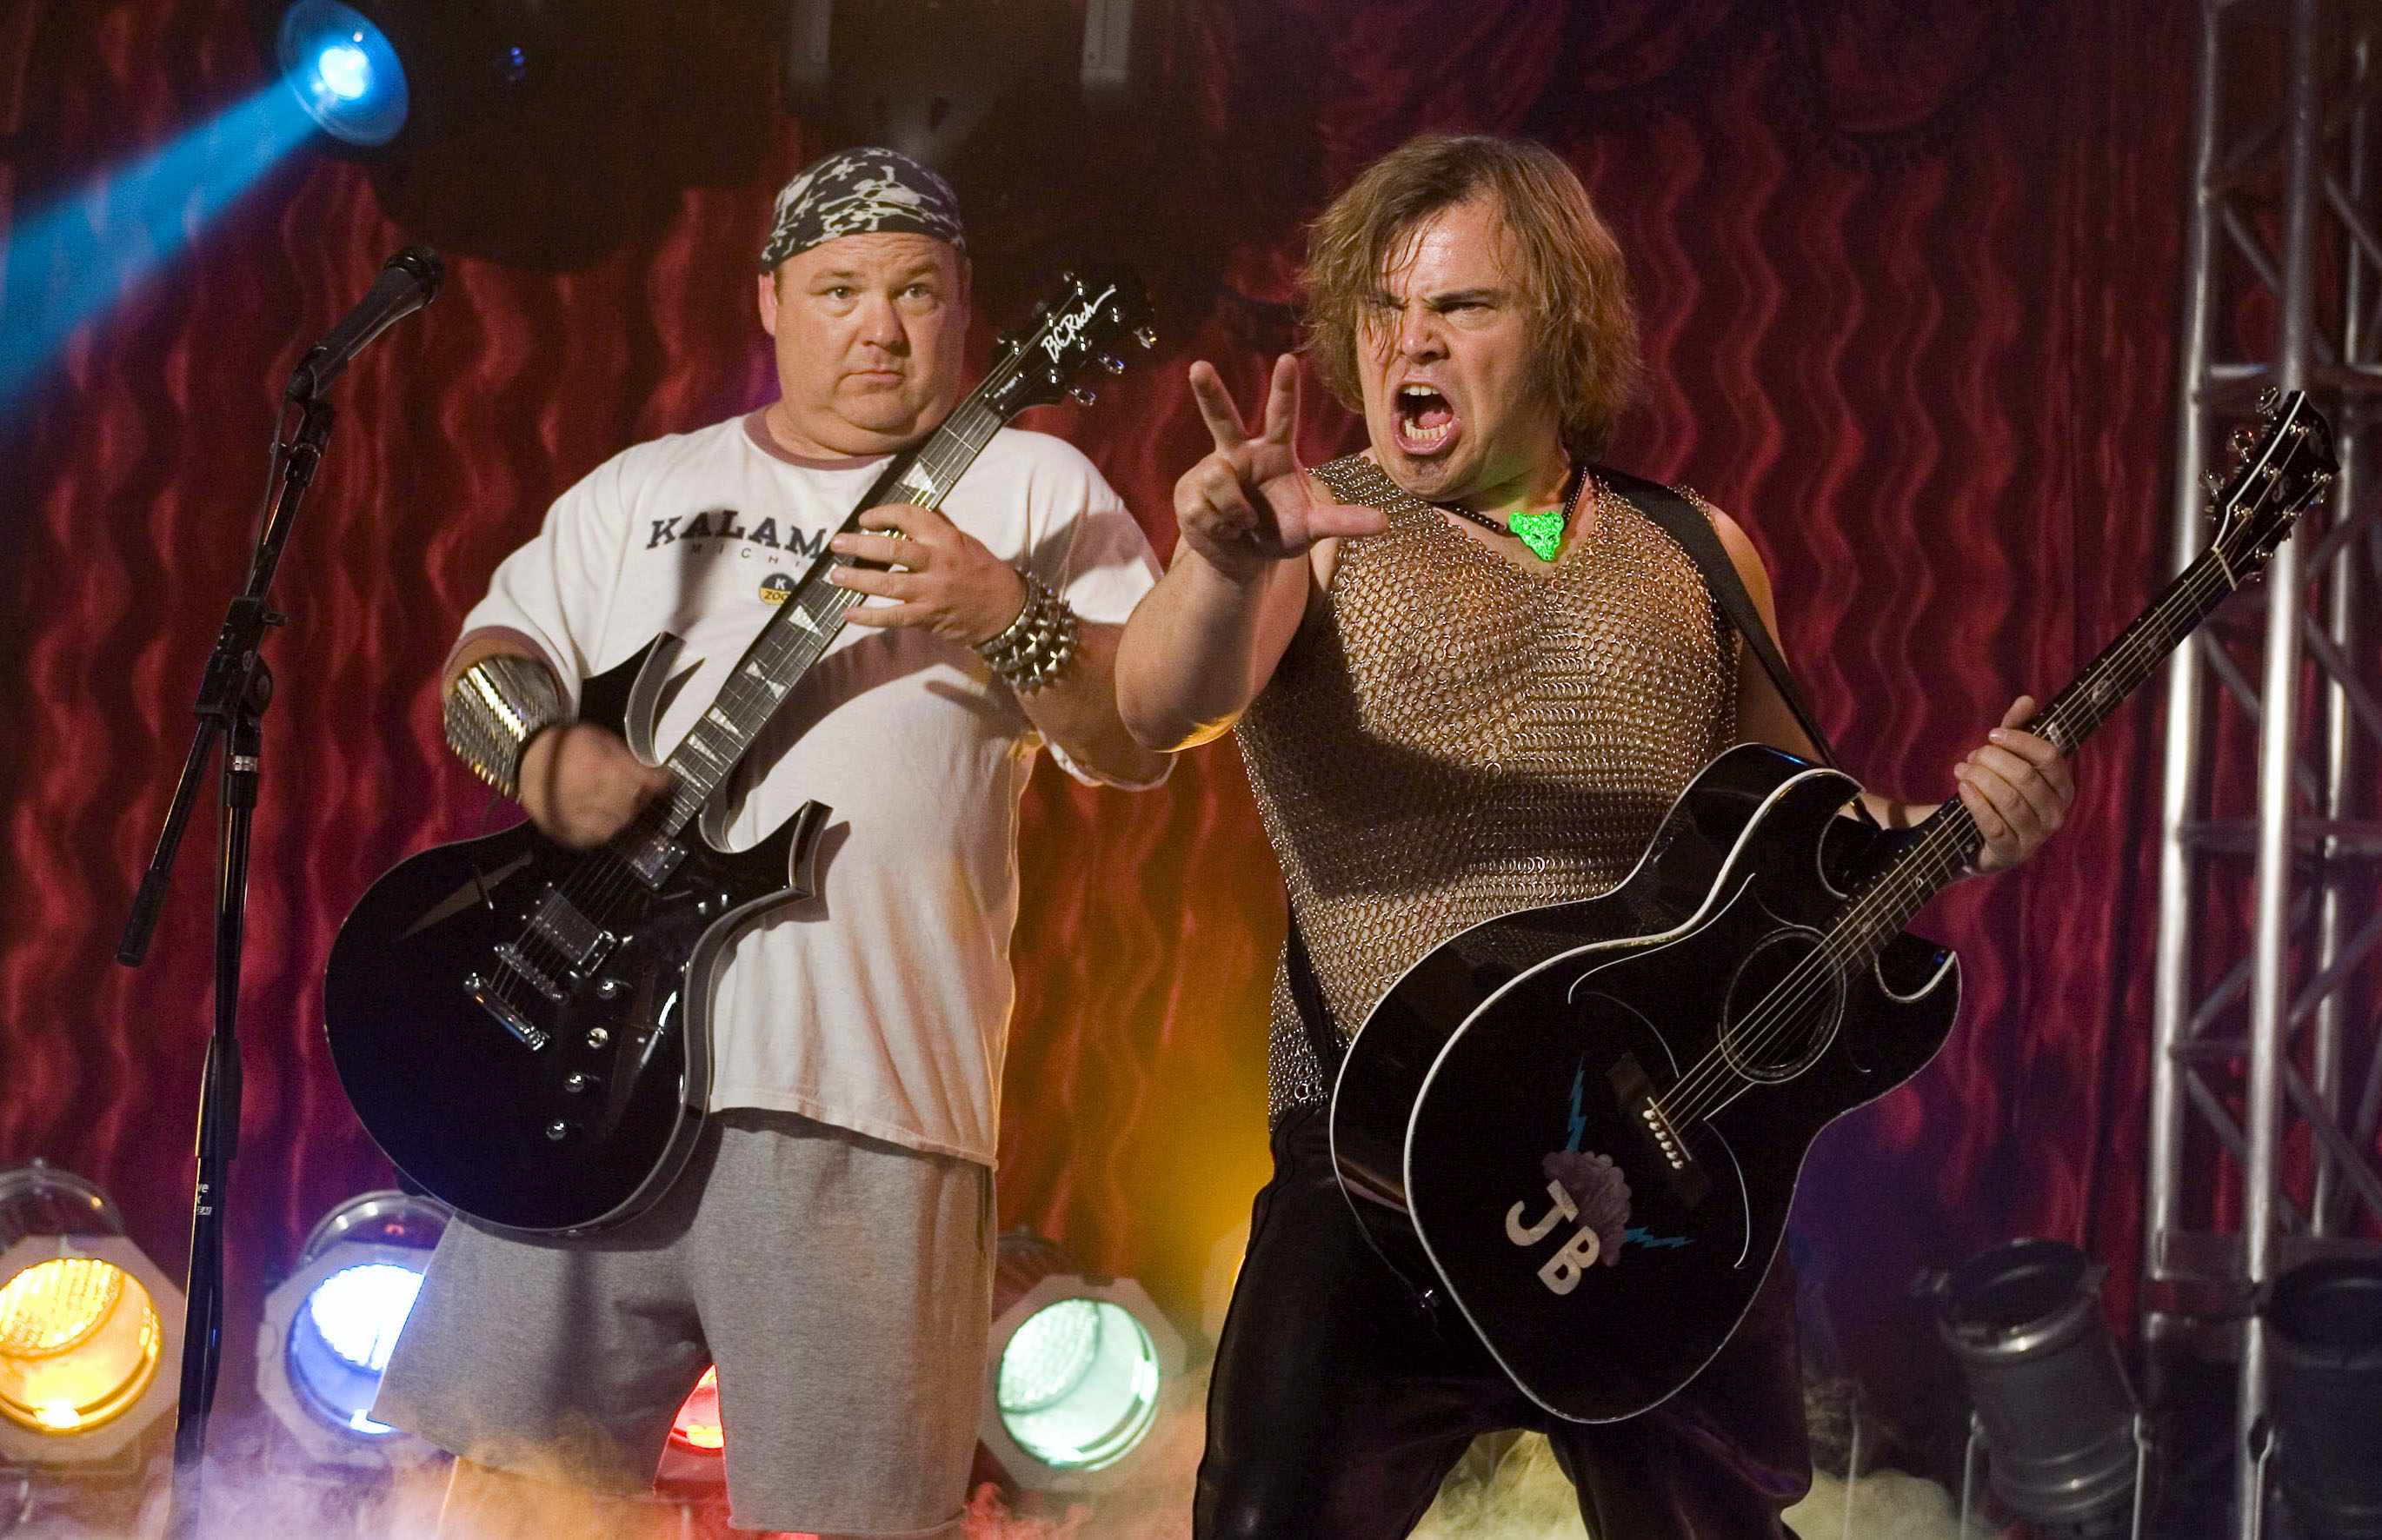 Jack Black and Kyle Gass of Tenacious D perform on stage with guitars